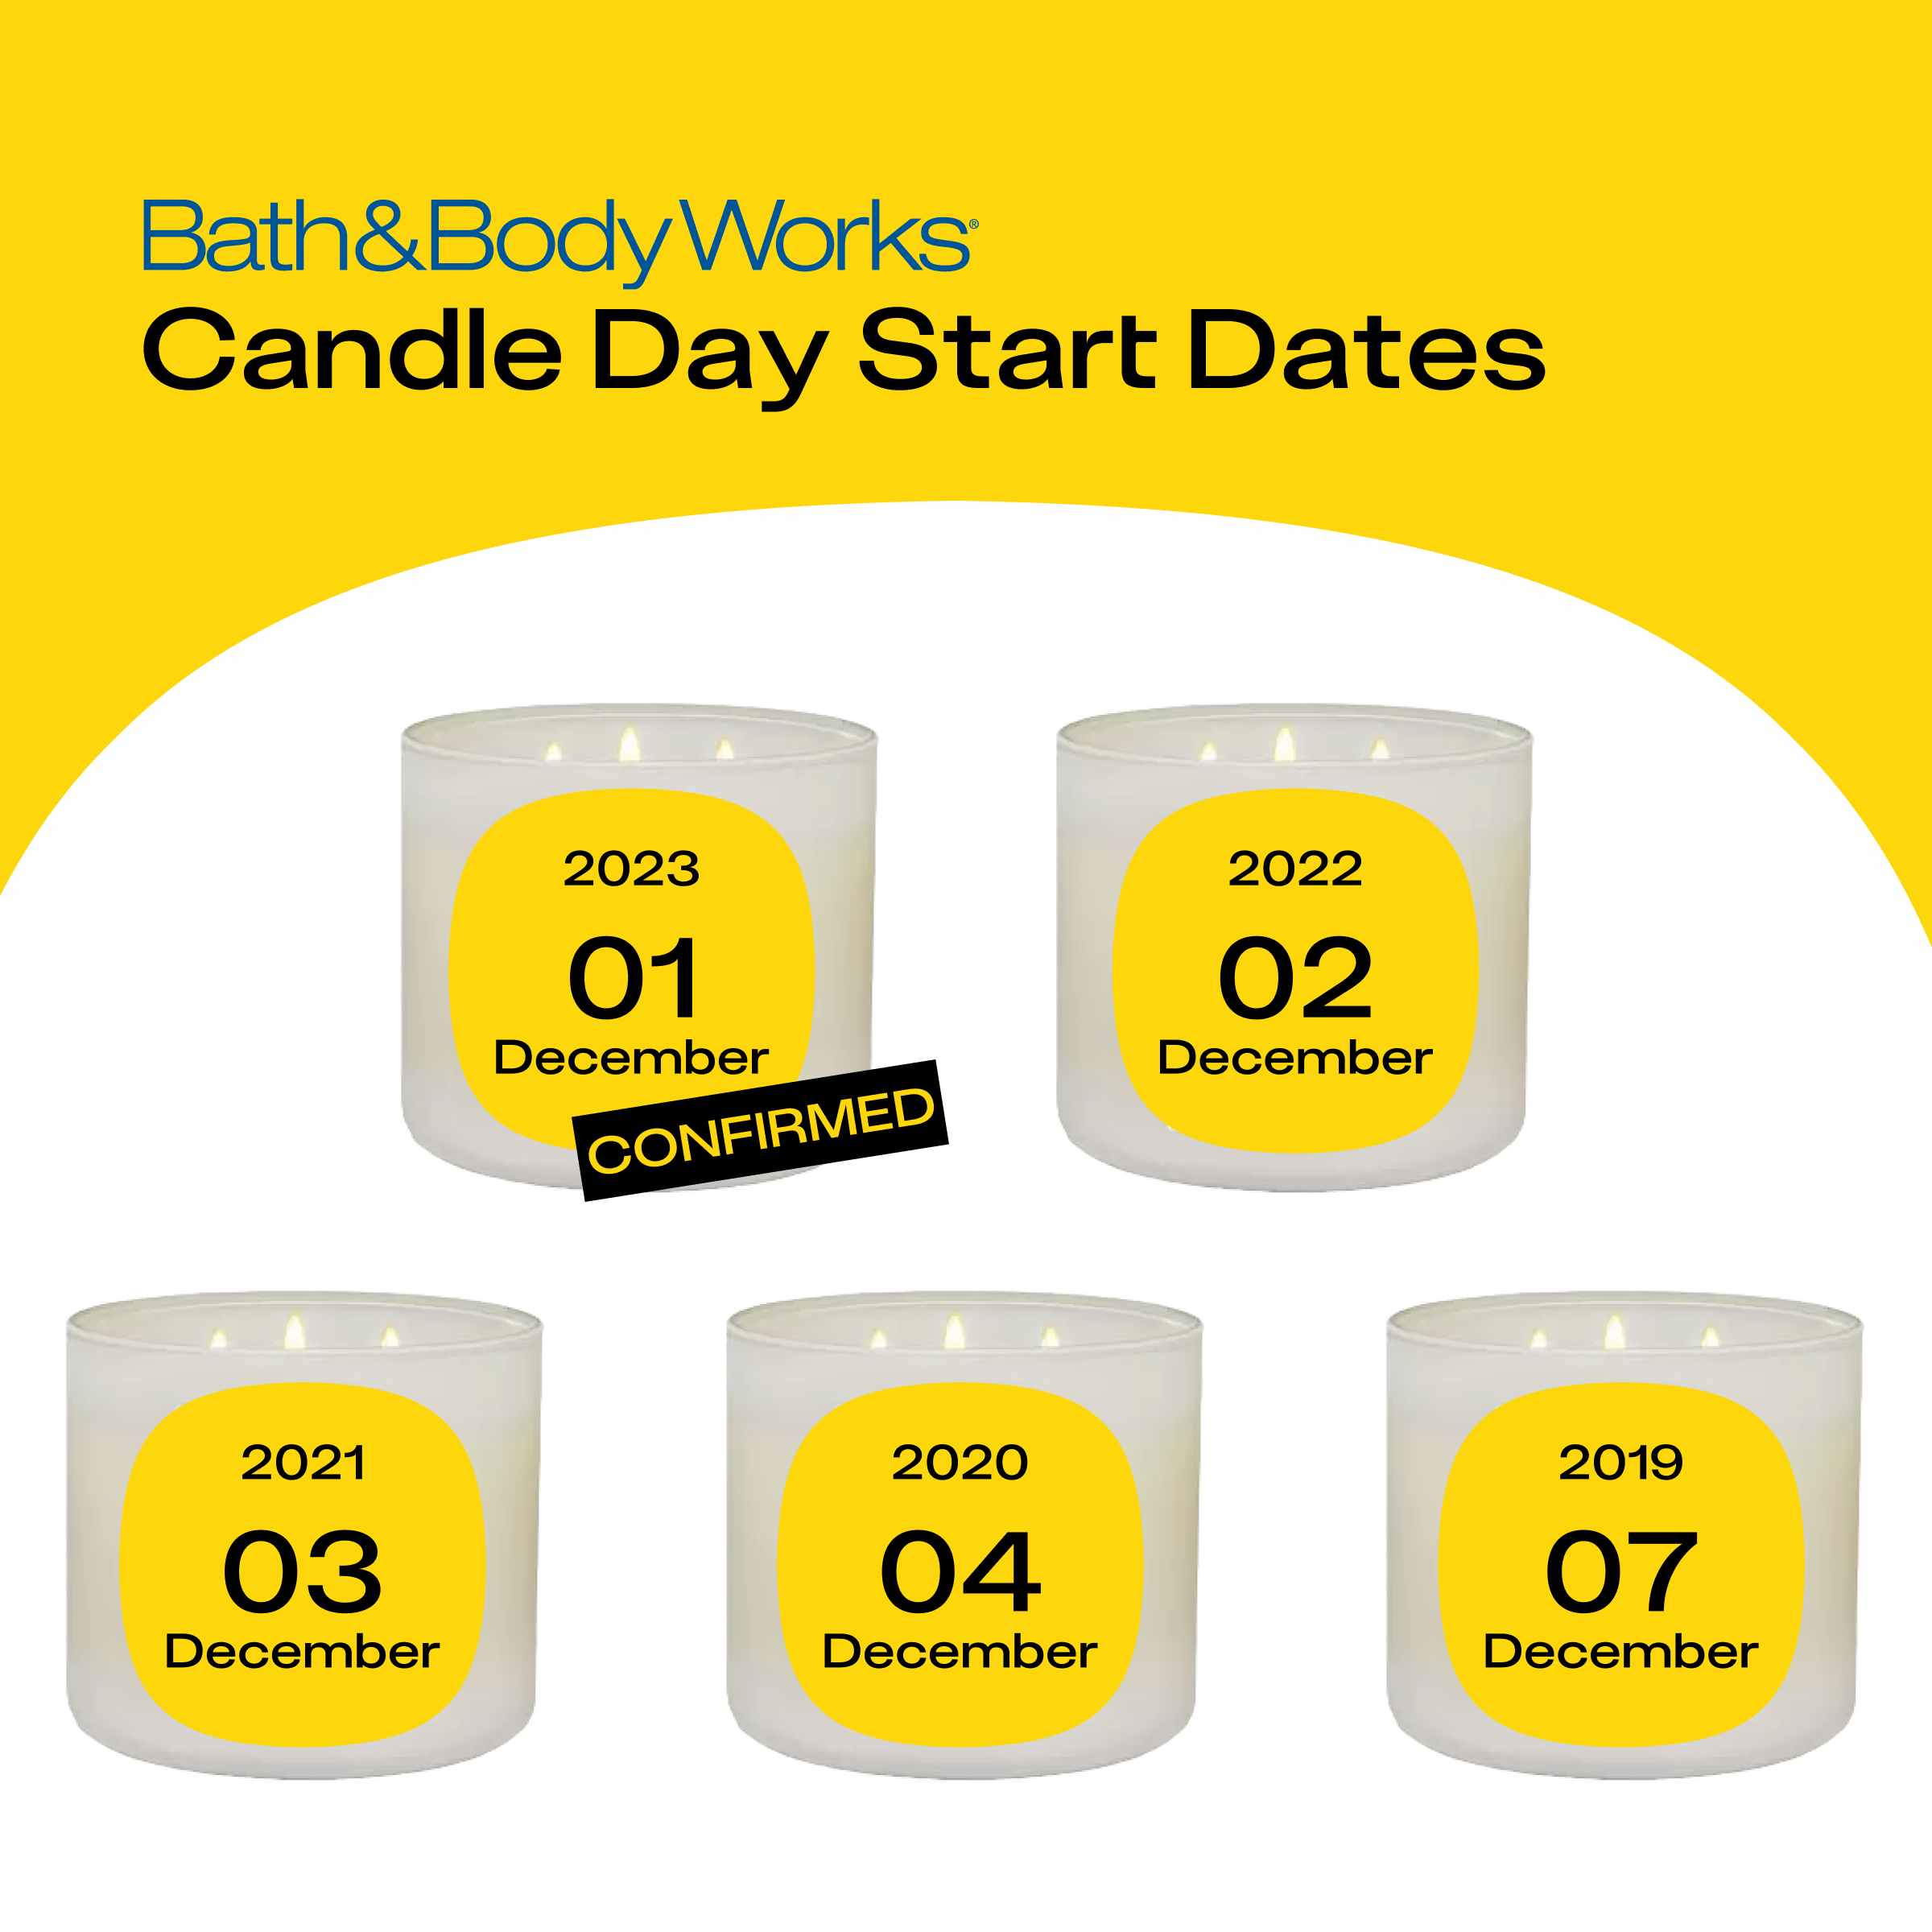 https://prod-cdn-thekrazycouponlady.imgix.net/wp-content/uploads/2020/11/bath-and-body-works-candle-day-1701279821-1701279822.png?auto=format&fit=fill&q=25